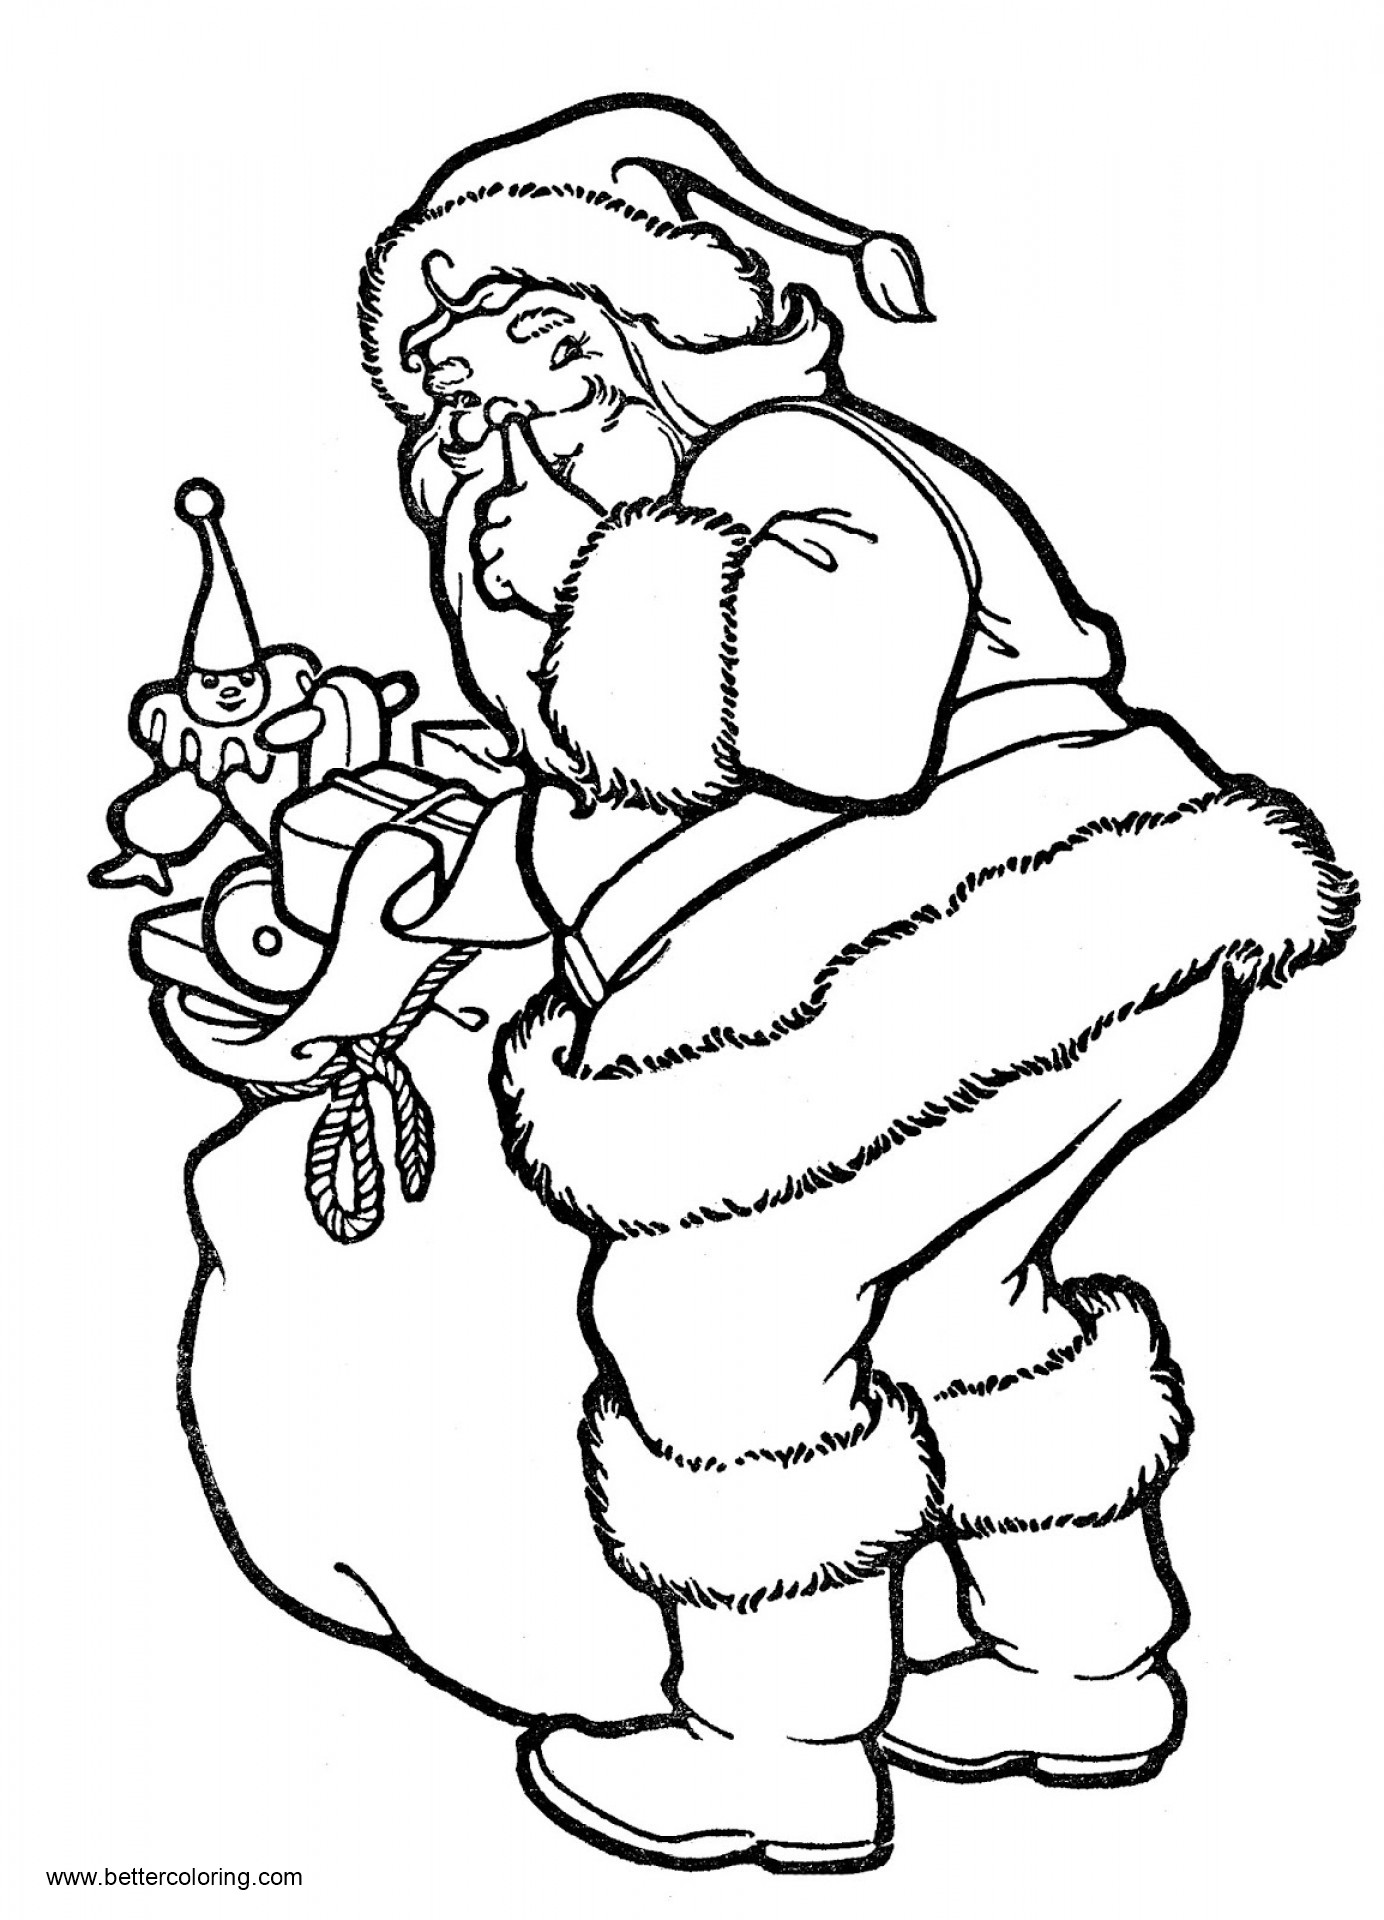 Christmas Coloring Pages Cute Santa With Toys - Free Printable Coloring